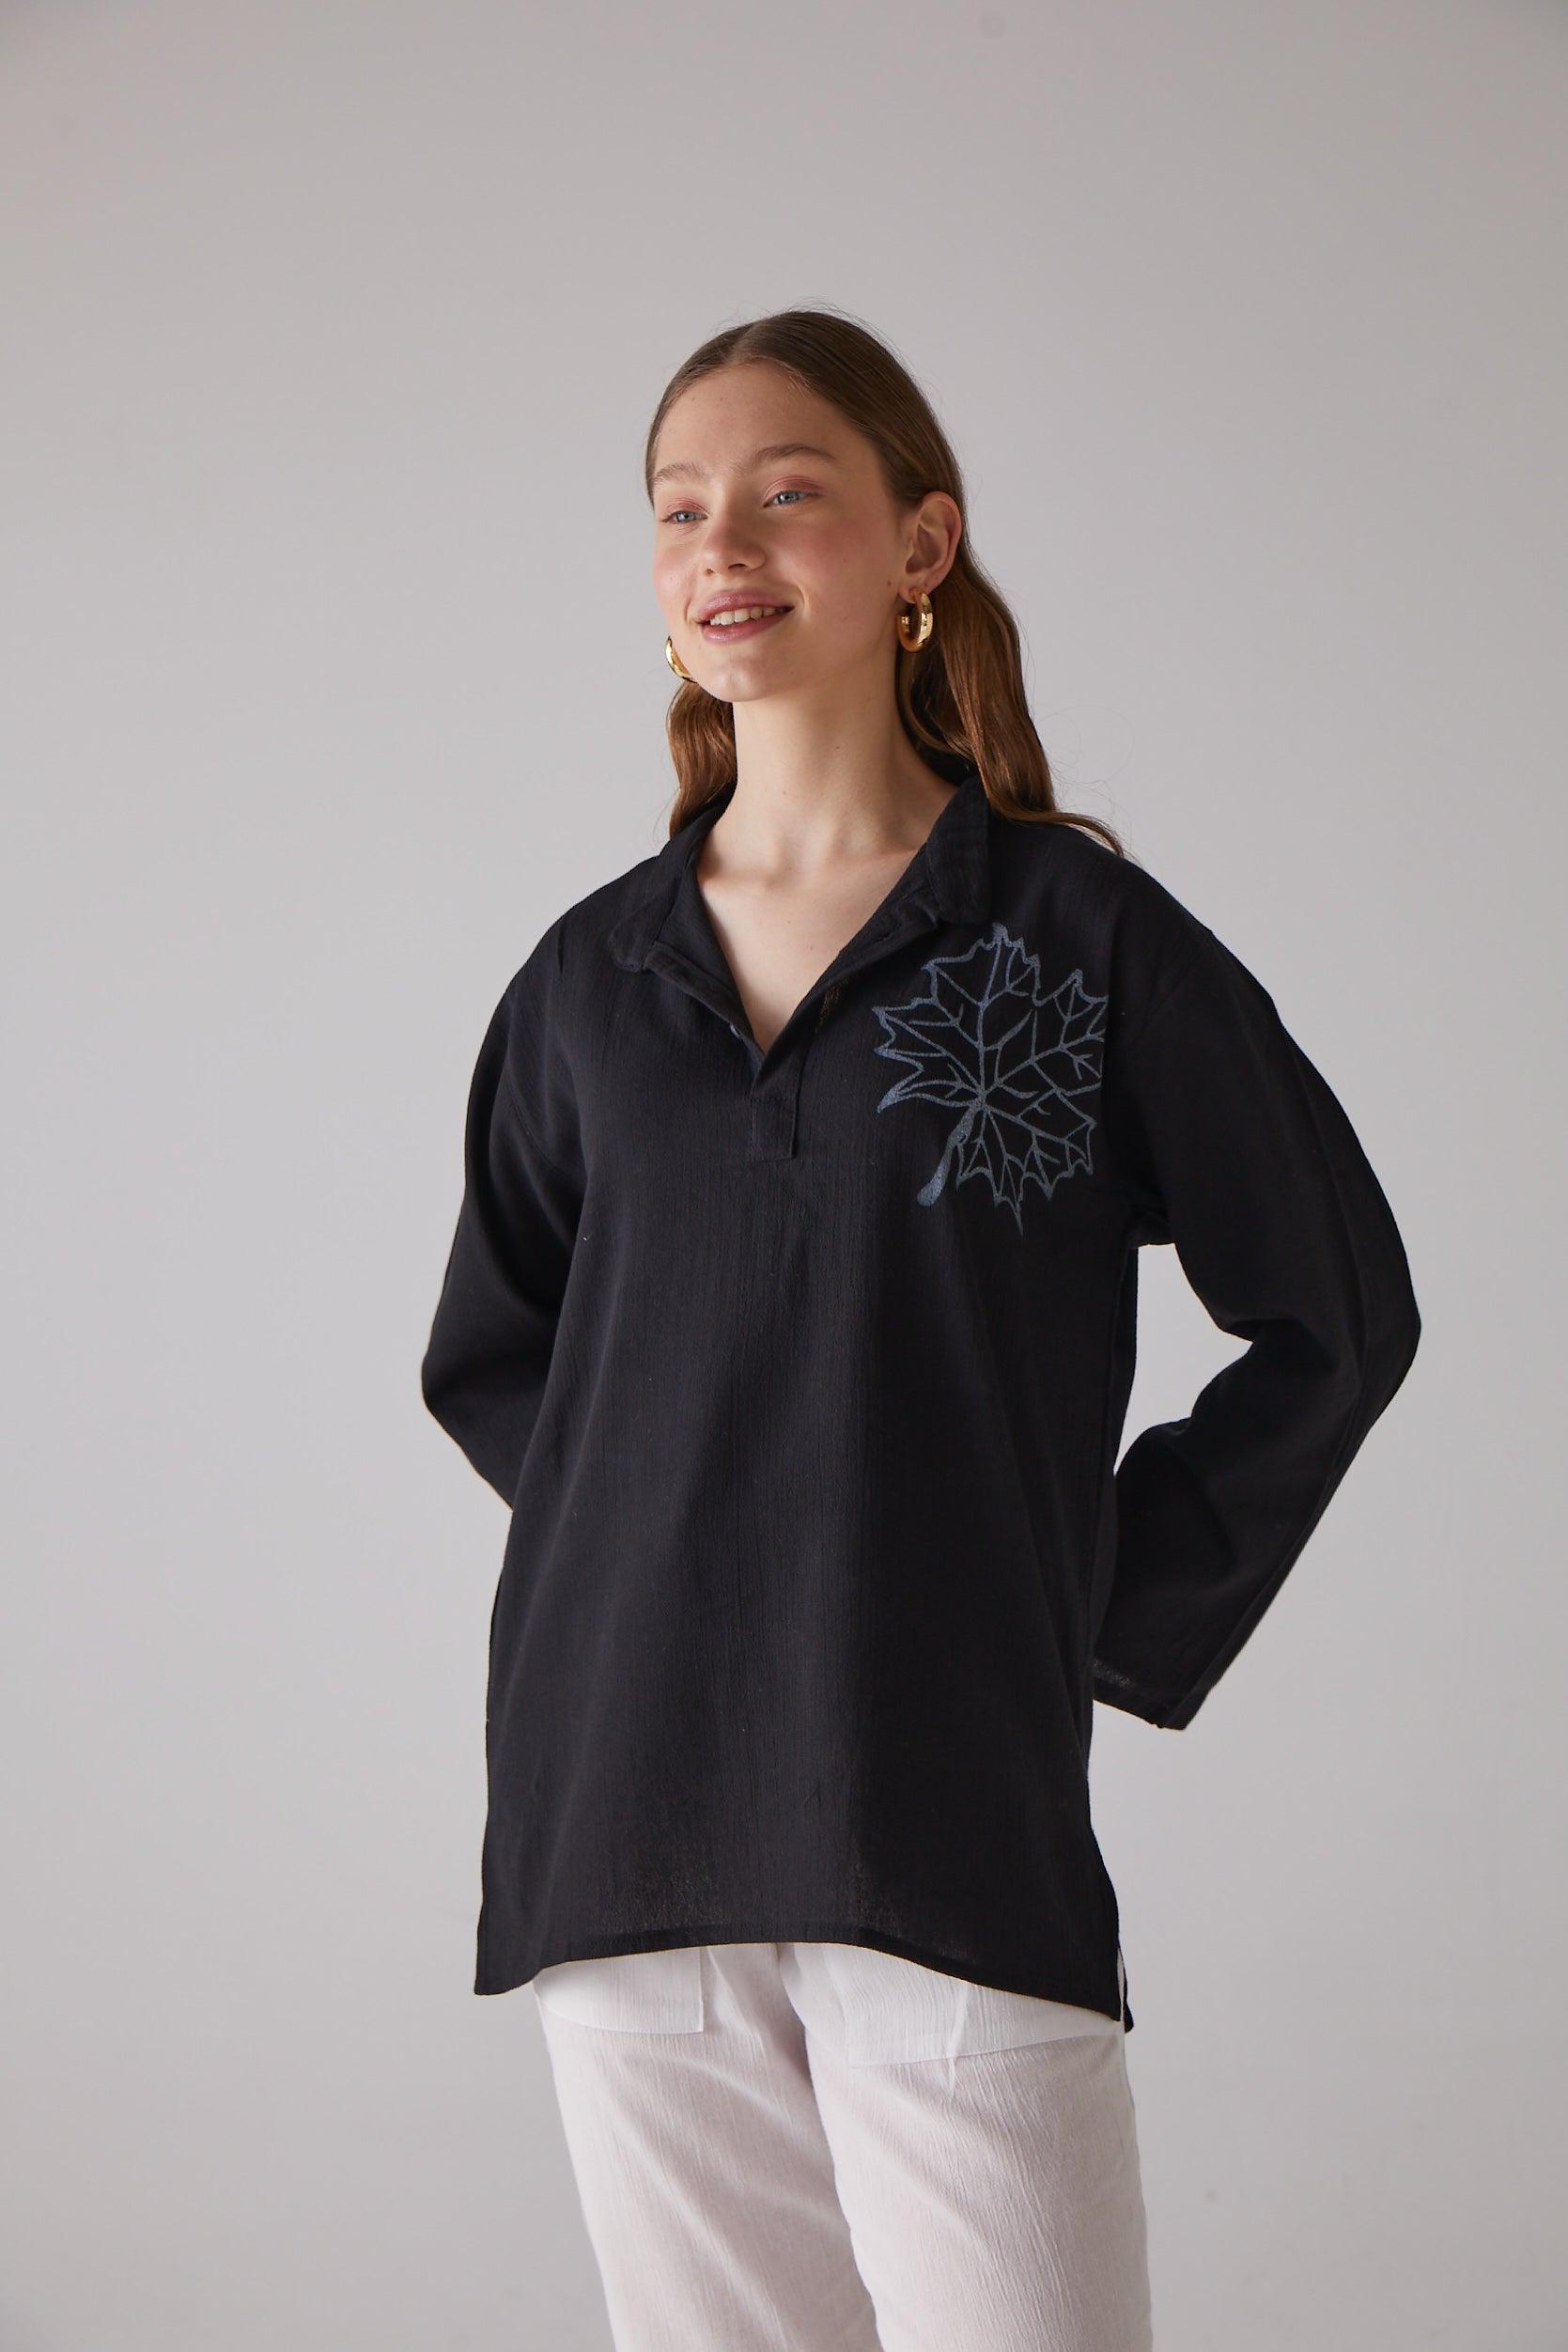 Long - Sleeve Black Shirt with Sycamore Leaf Pattern - 100% Organic Cotton - trendynow